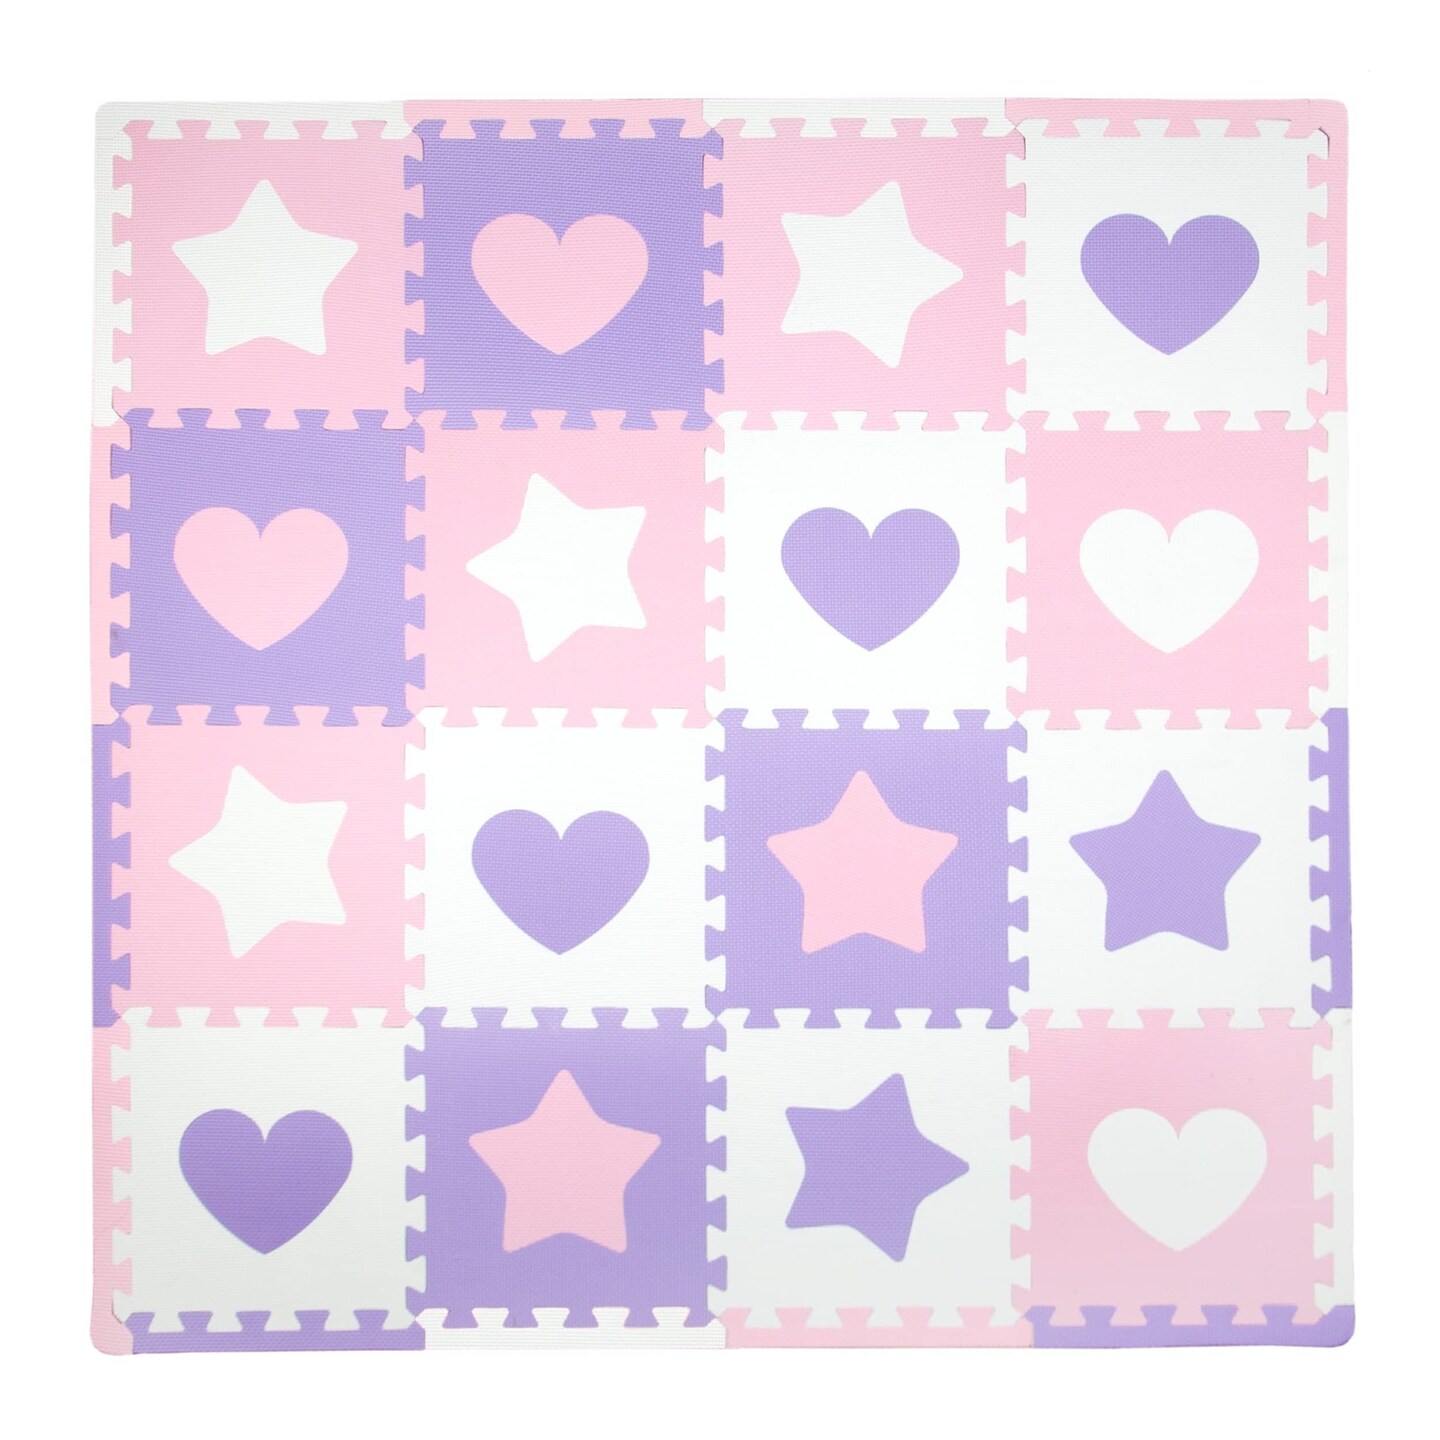 Tadpoles Hearts and Stars Foam Playmats for Kids, 16 Interlocking Foam Tiles, Waterproof, Durable, and Long-lasting | Total Floor Coverage 50&#x201D; x 50&#x201D; | For Ages 3 and Up | Pink, Purple, and White